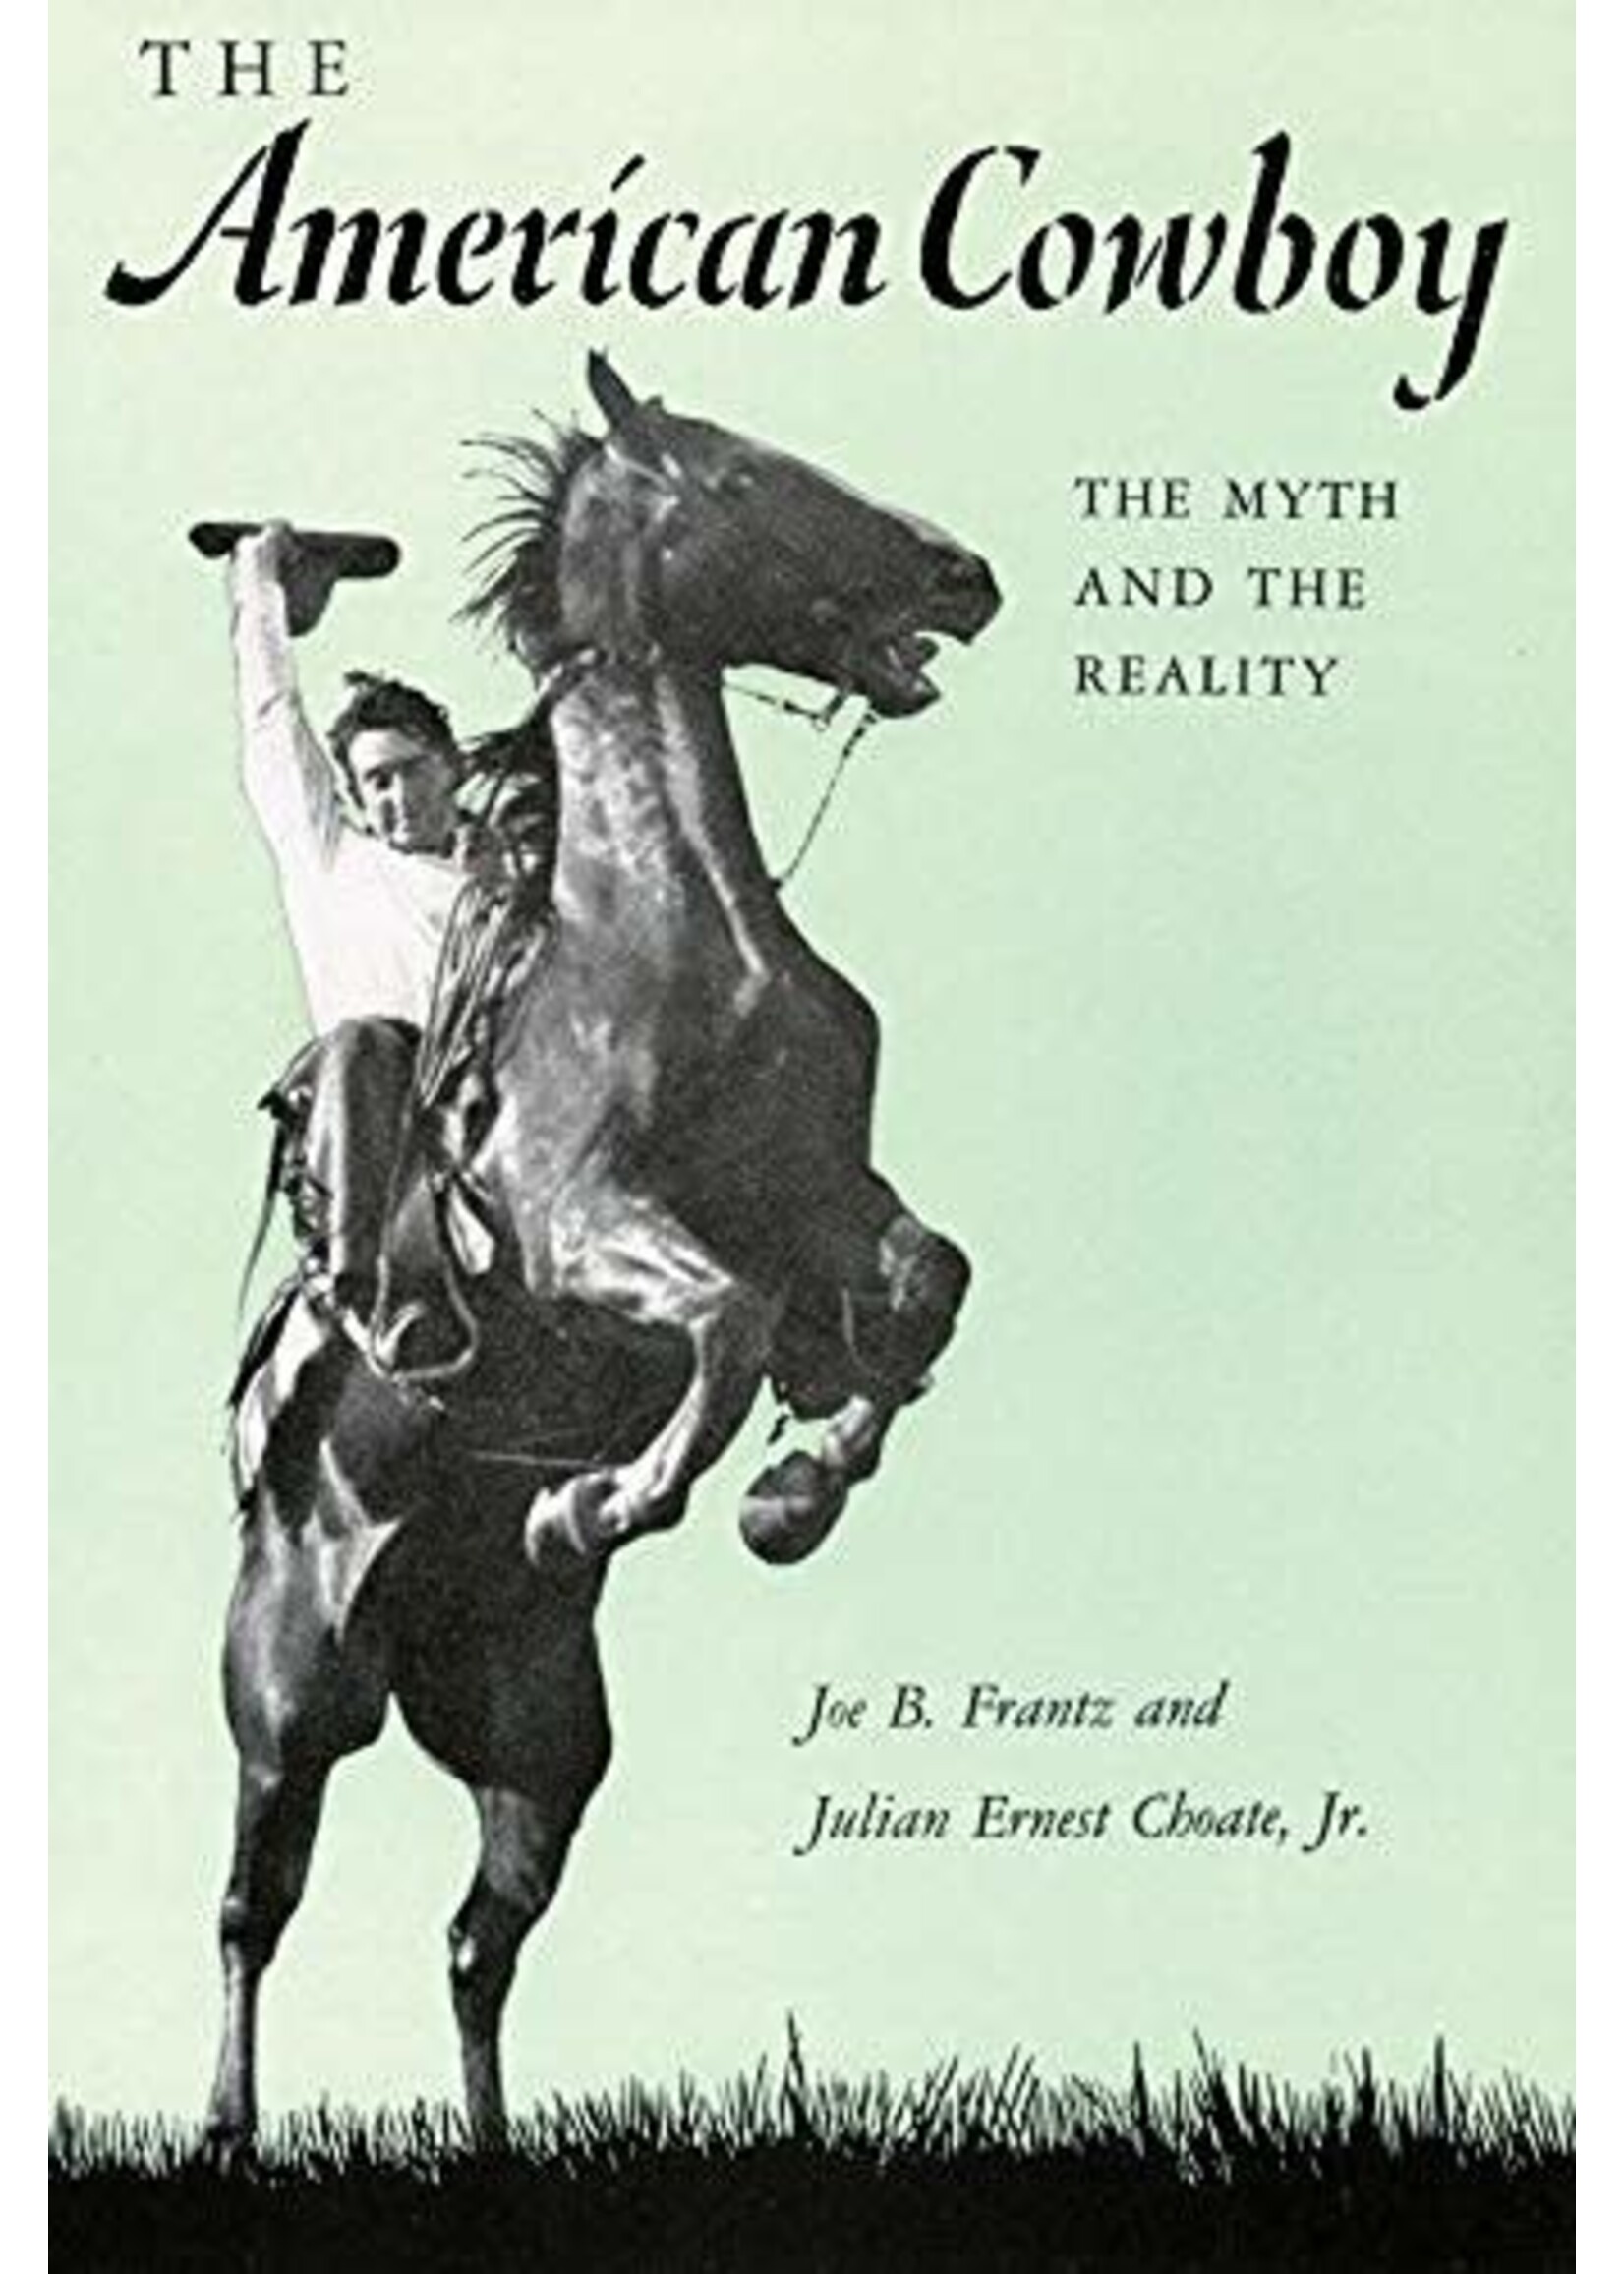 The American Cowboy: The Myth and the Reality